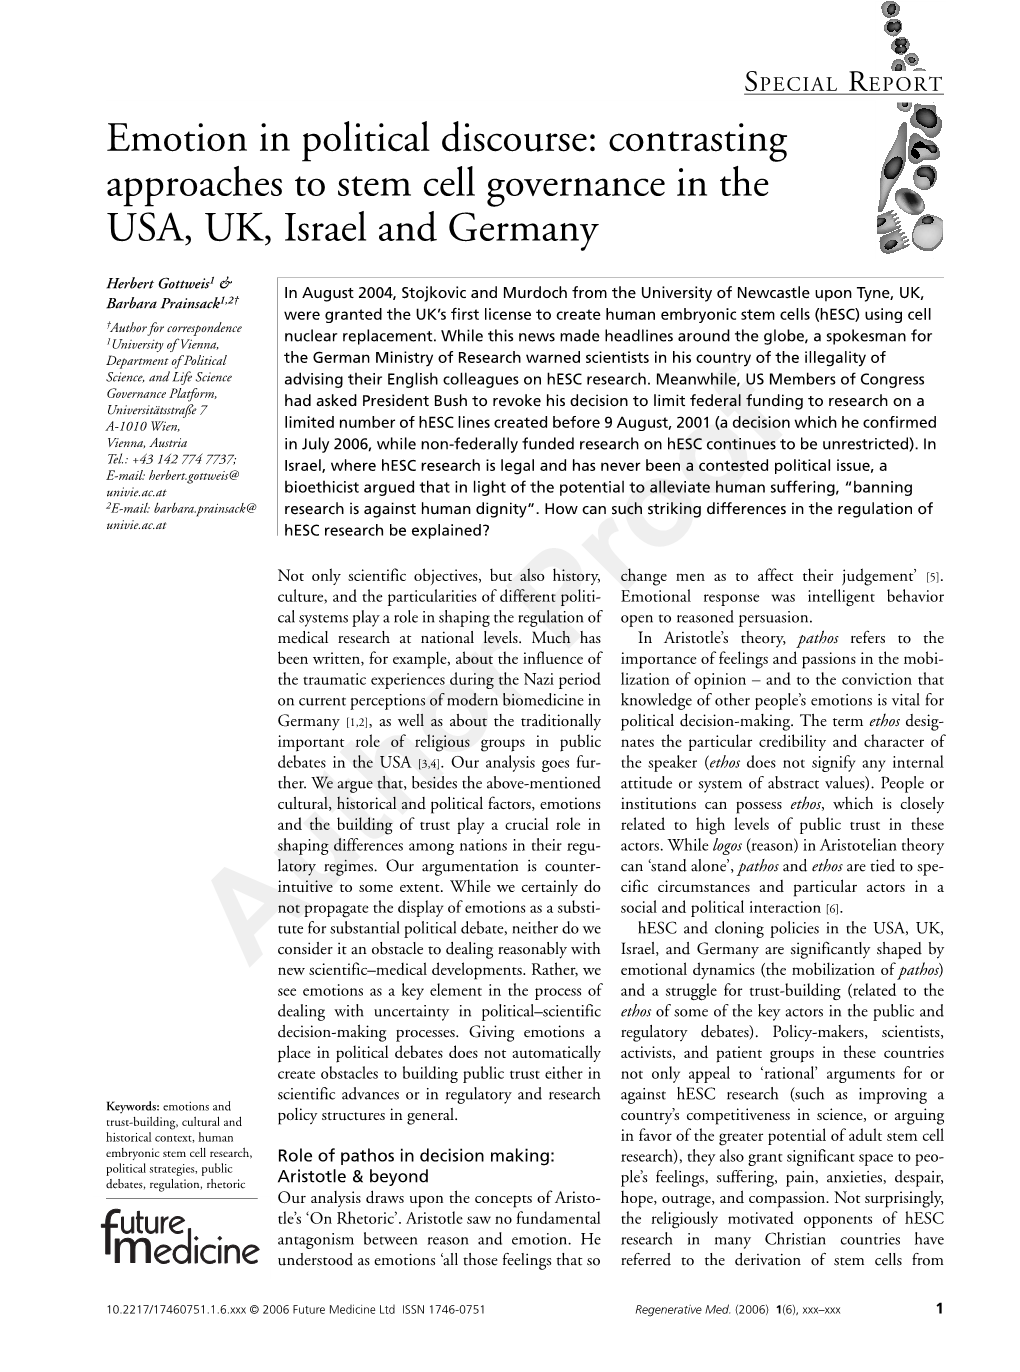 Emotion in Political Discourse: Contrasting Approaches to Stem Cell Governance in the USA, UK, Israel and Germany